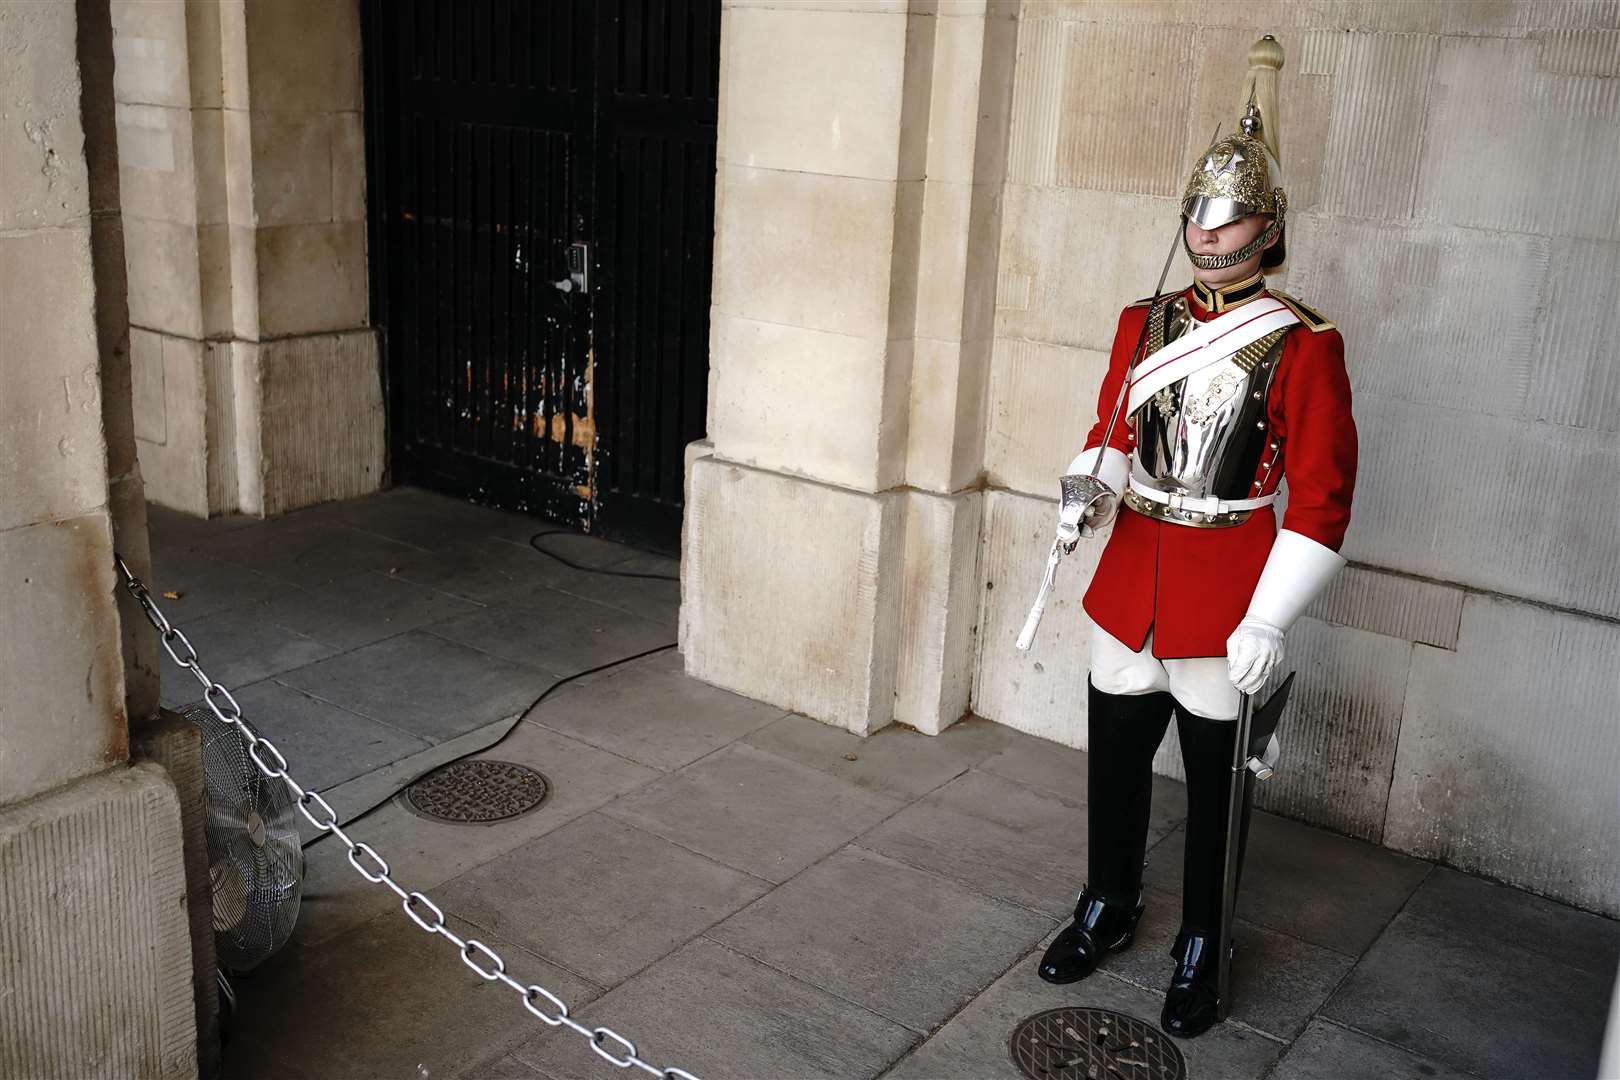 A member of the Household Troop had a fan placed next to him at Horse Guards Parade in central London (Aaron Chown/PA)